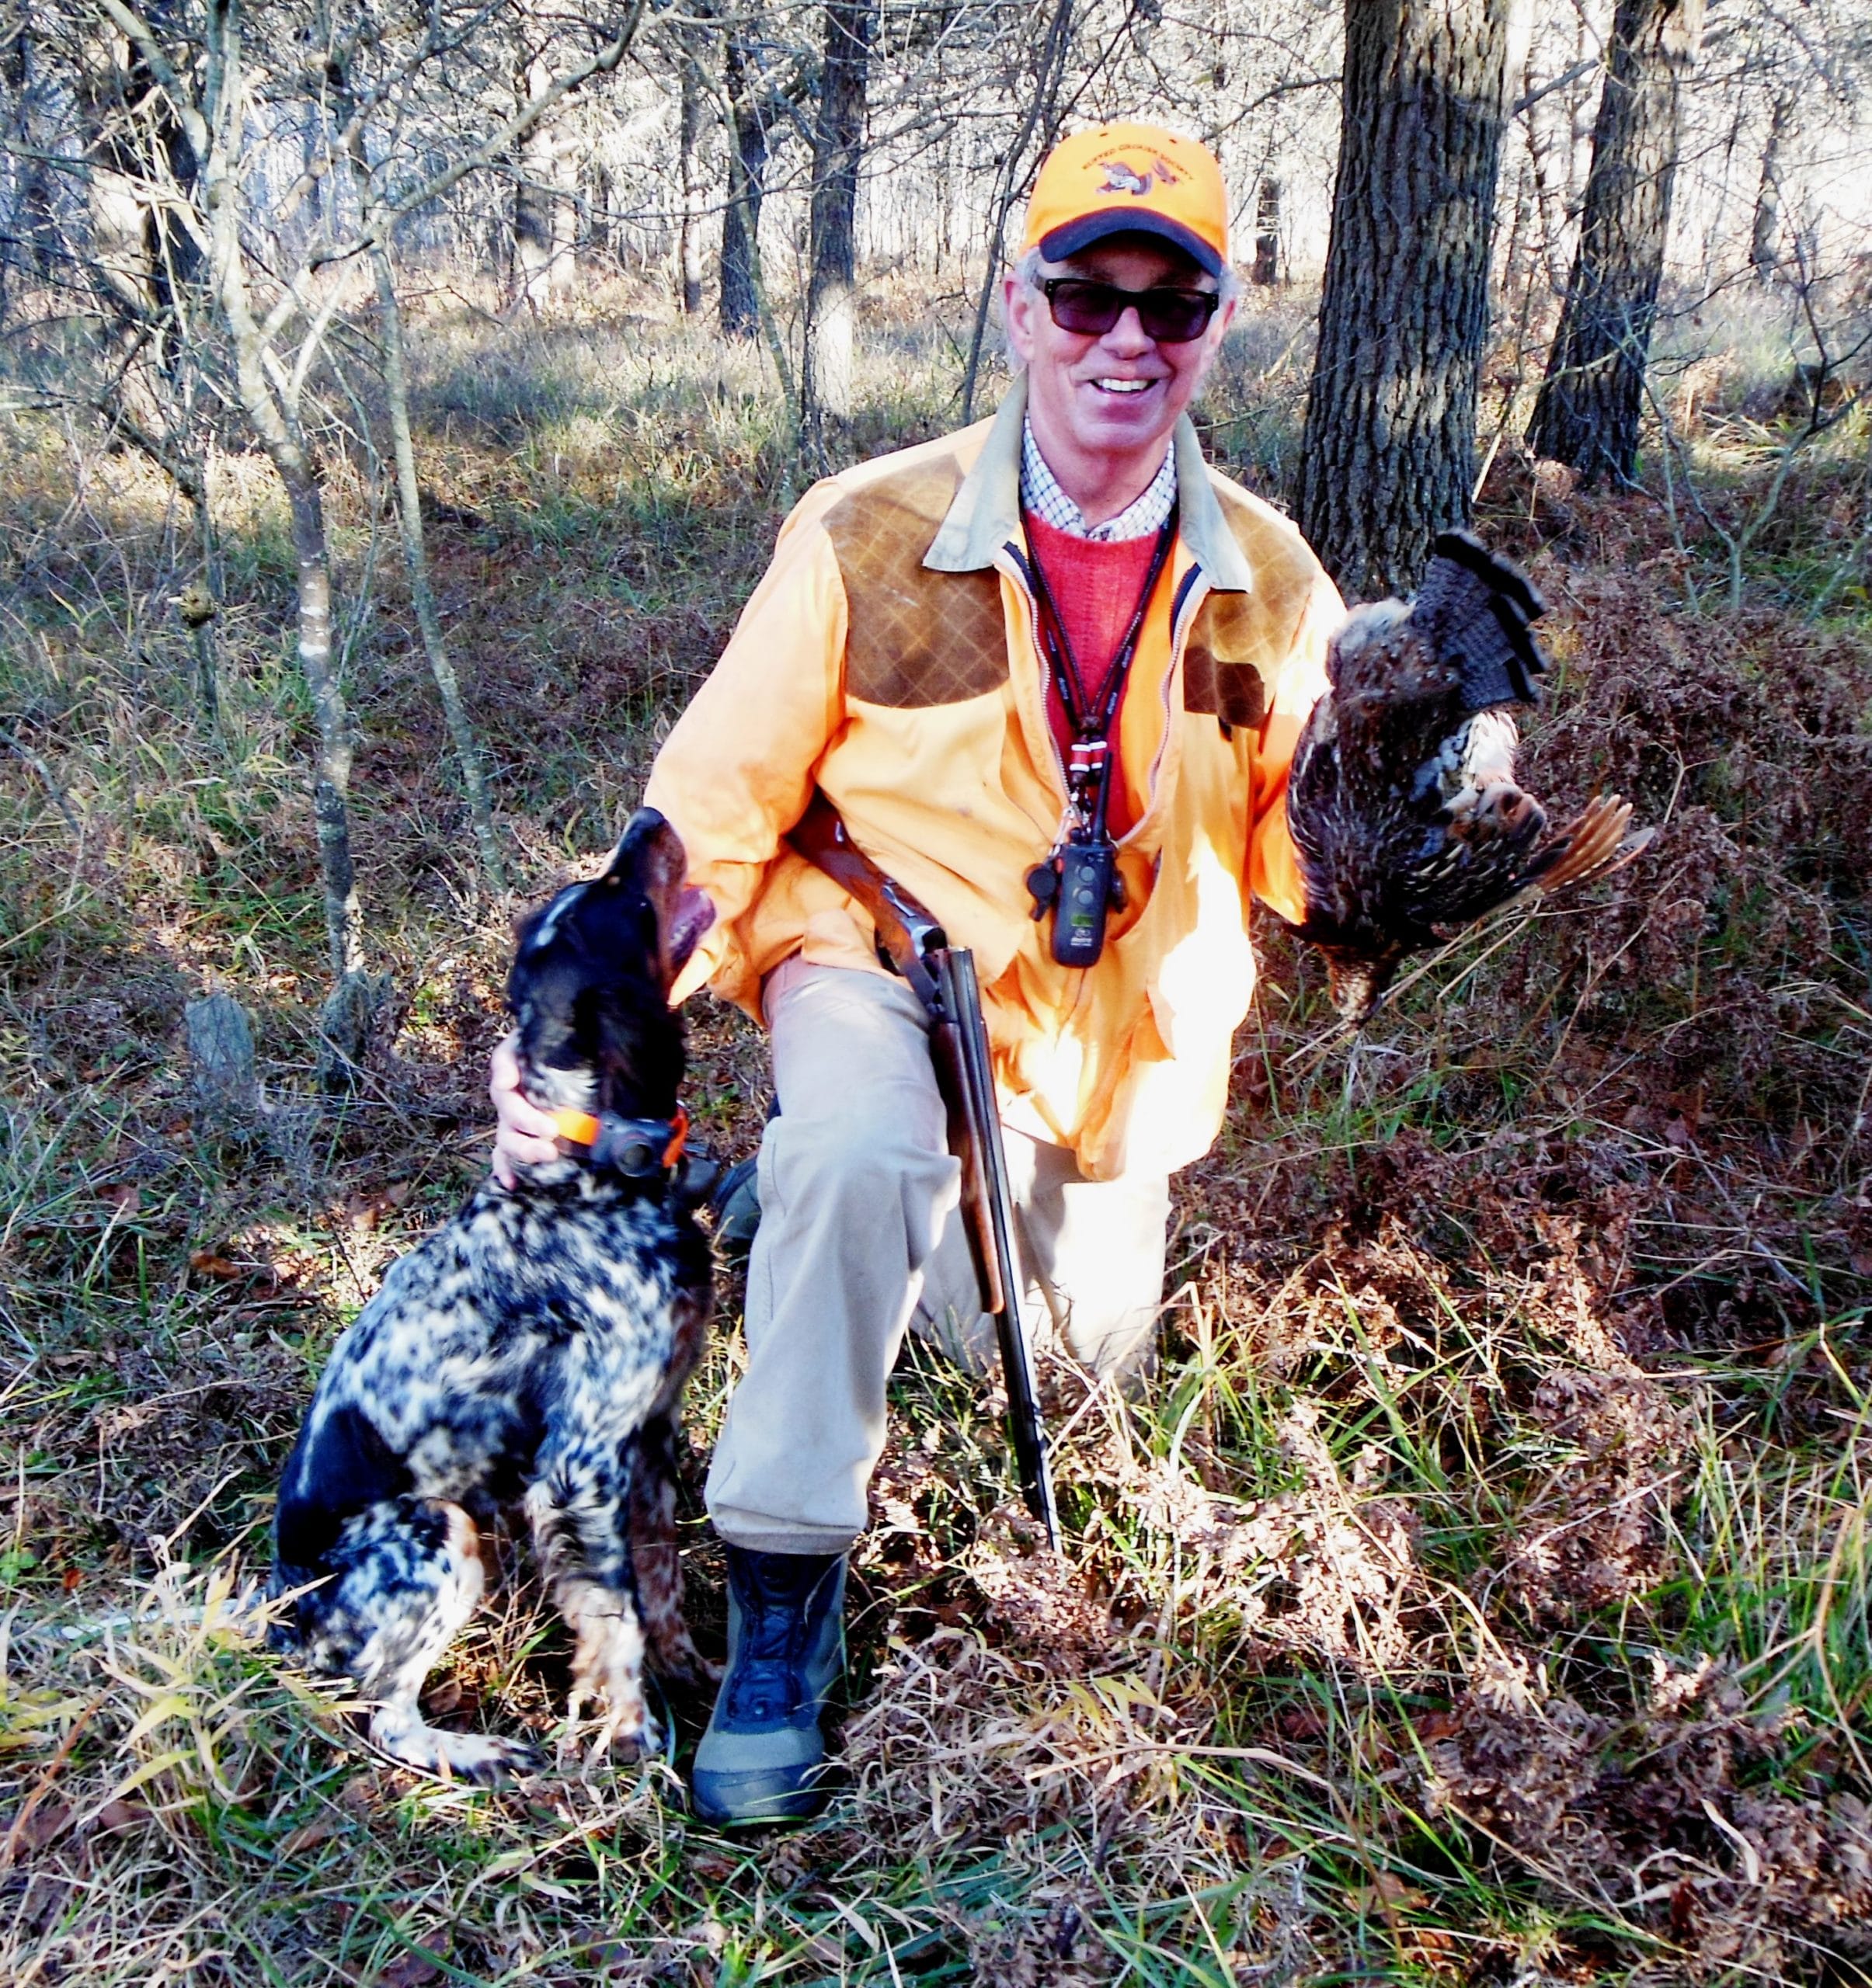 Dogs and hunters alike relish a successful grouse hunt, but success for most is measured in flushes, not kills. Photo Courtesy of Tom Huggler.